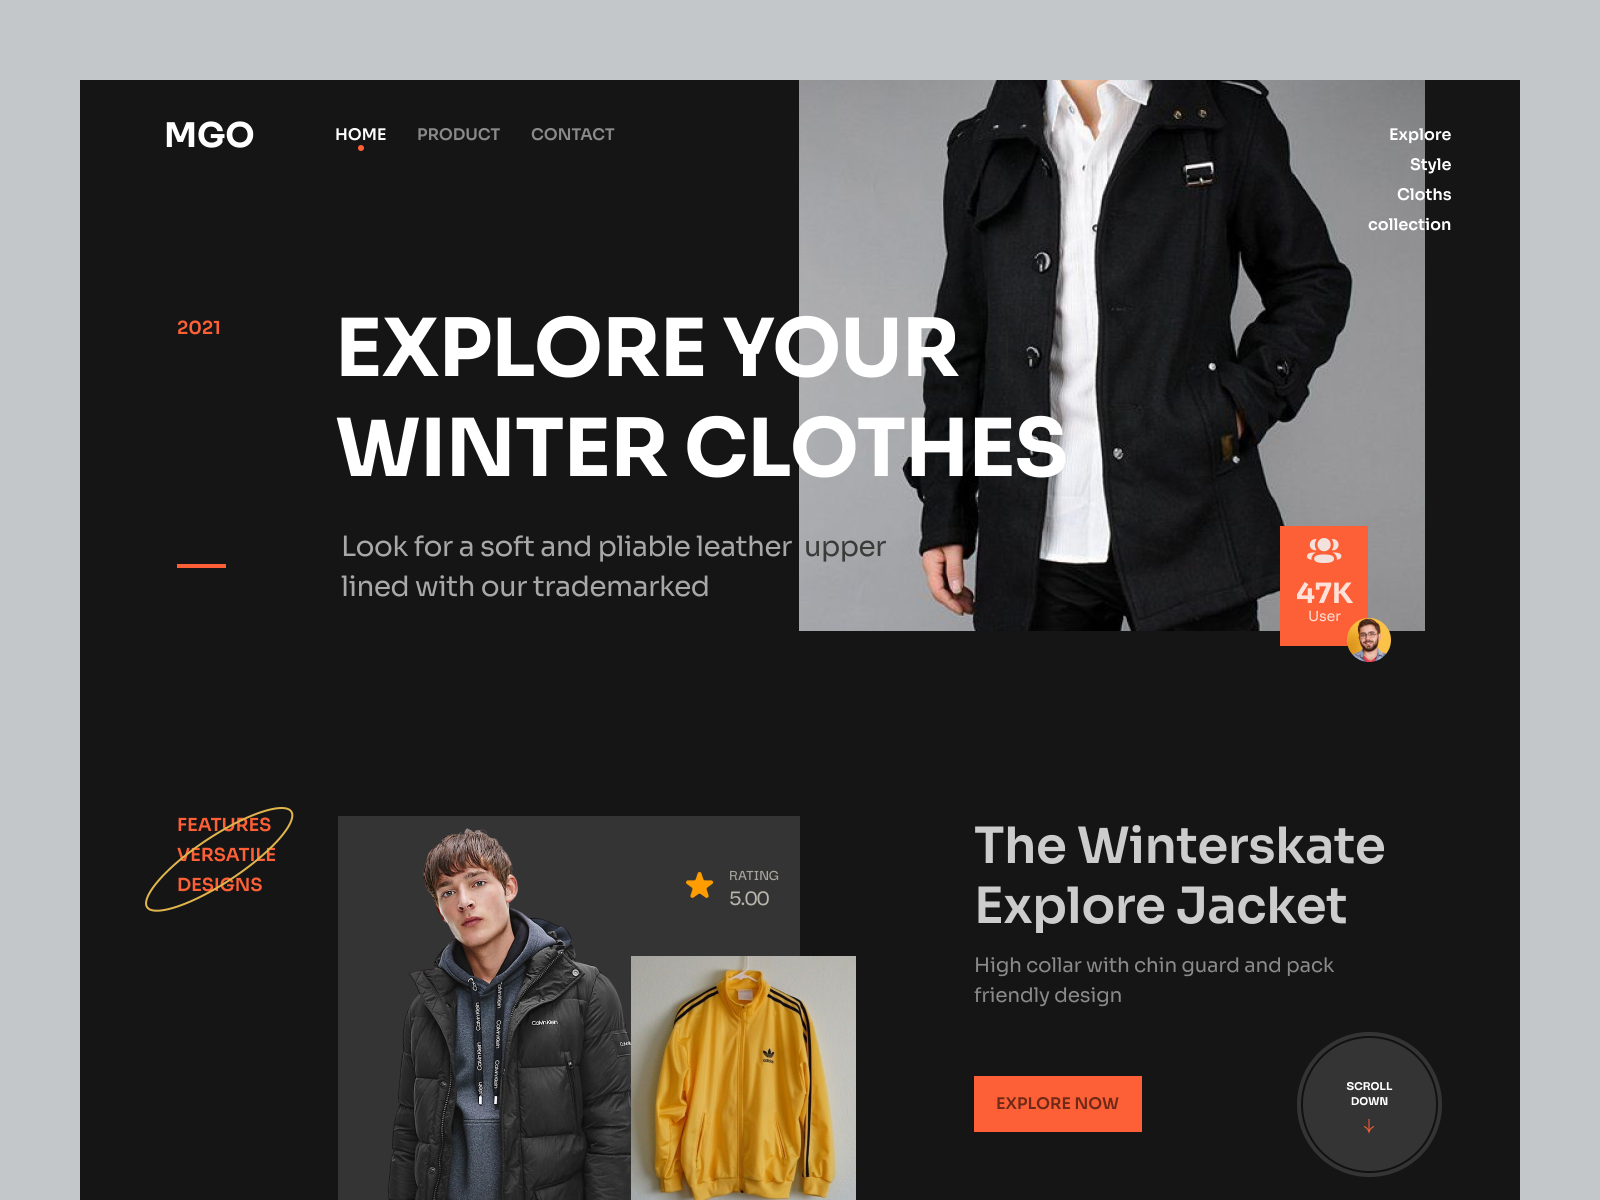 Fashion Website Design - MGO by Mansurul Haque on Dribbble